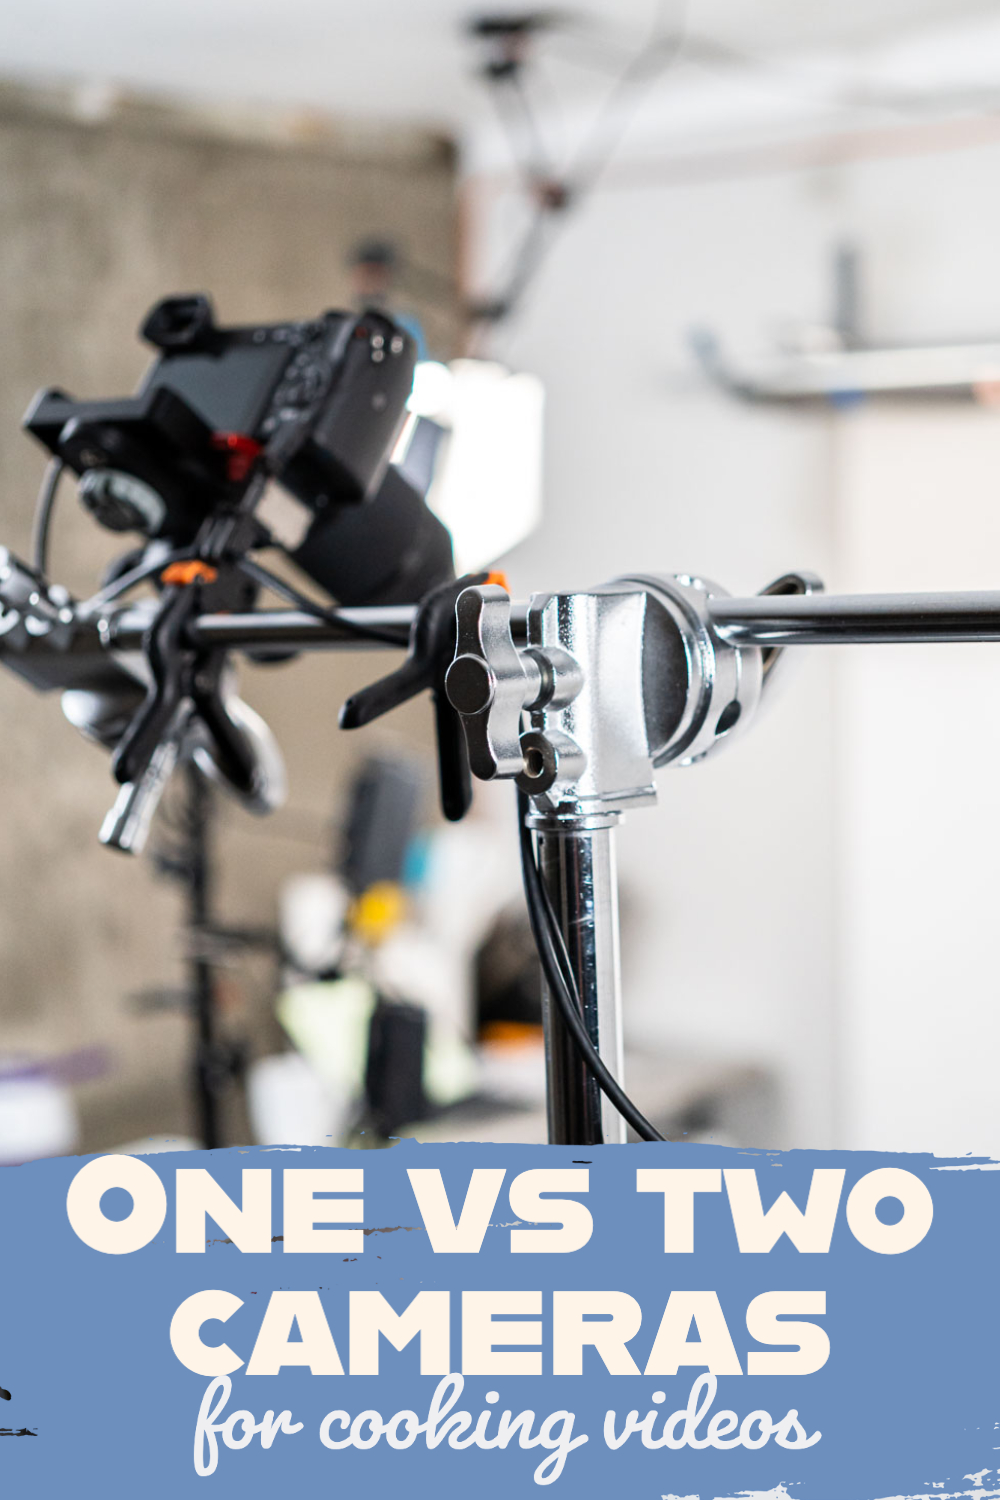 One vs two cameras for cooking videos